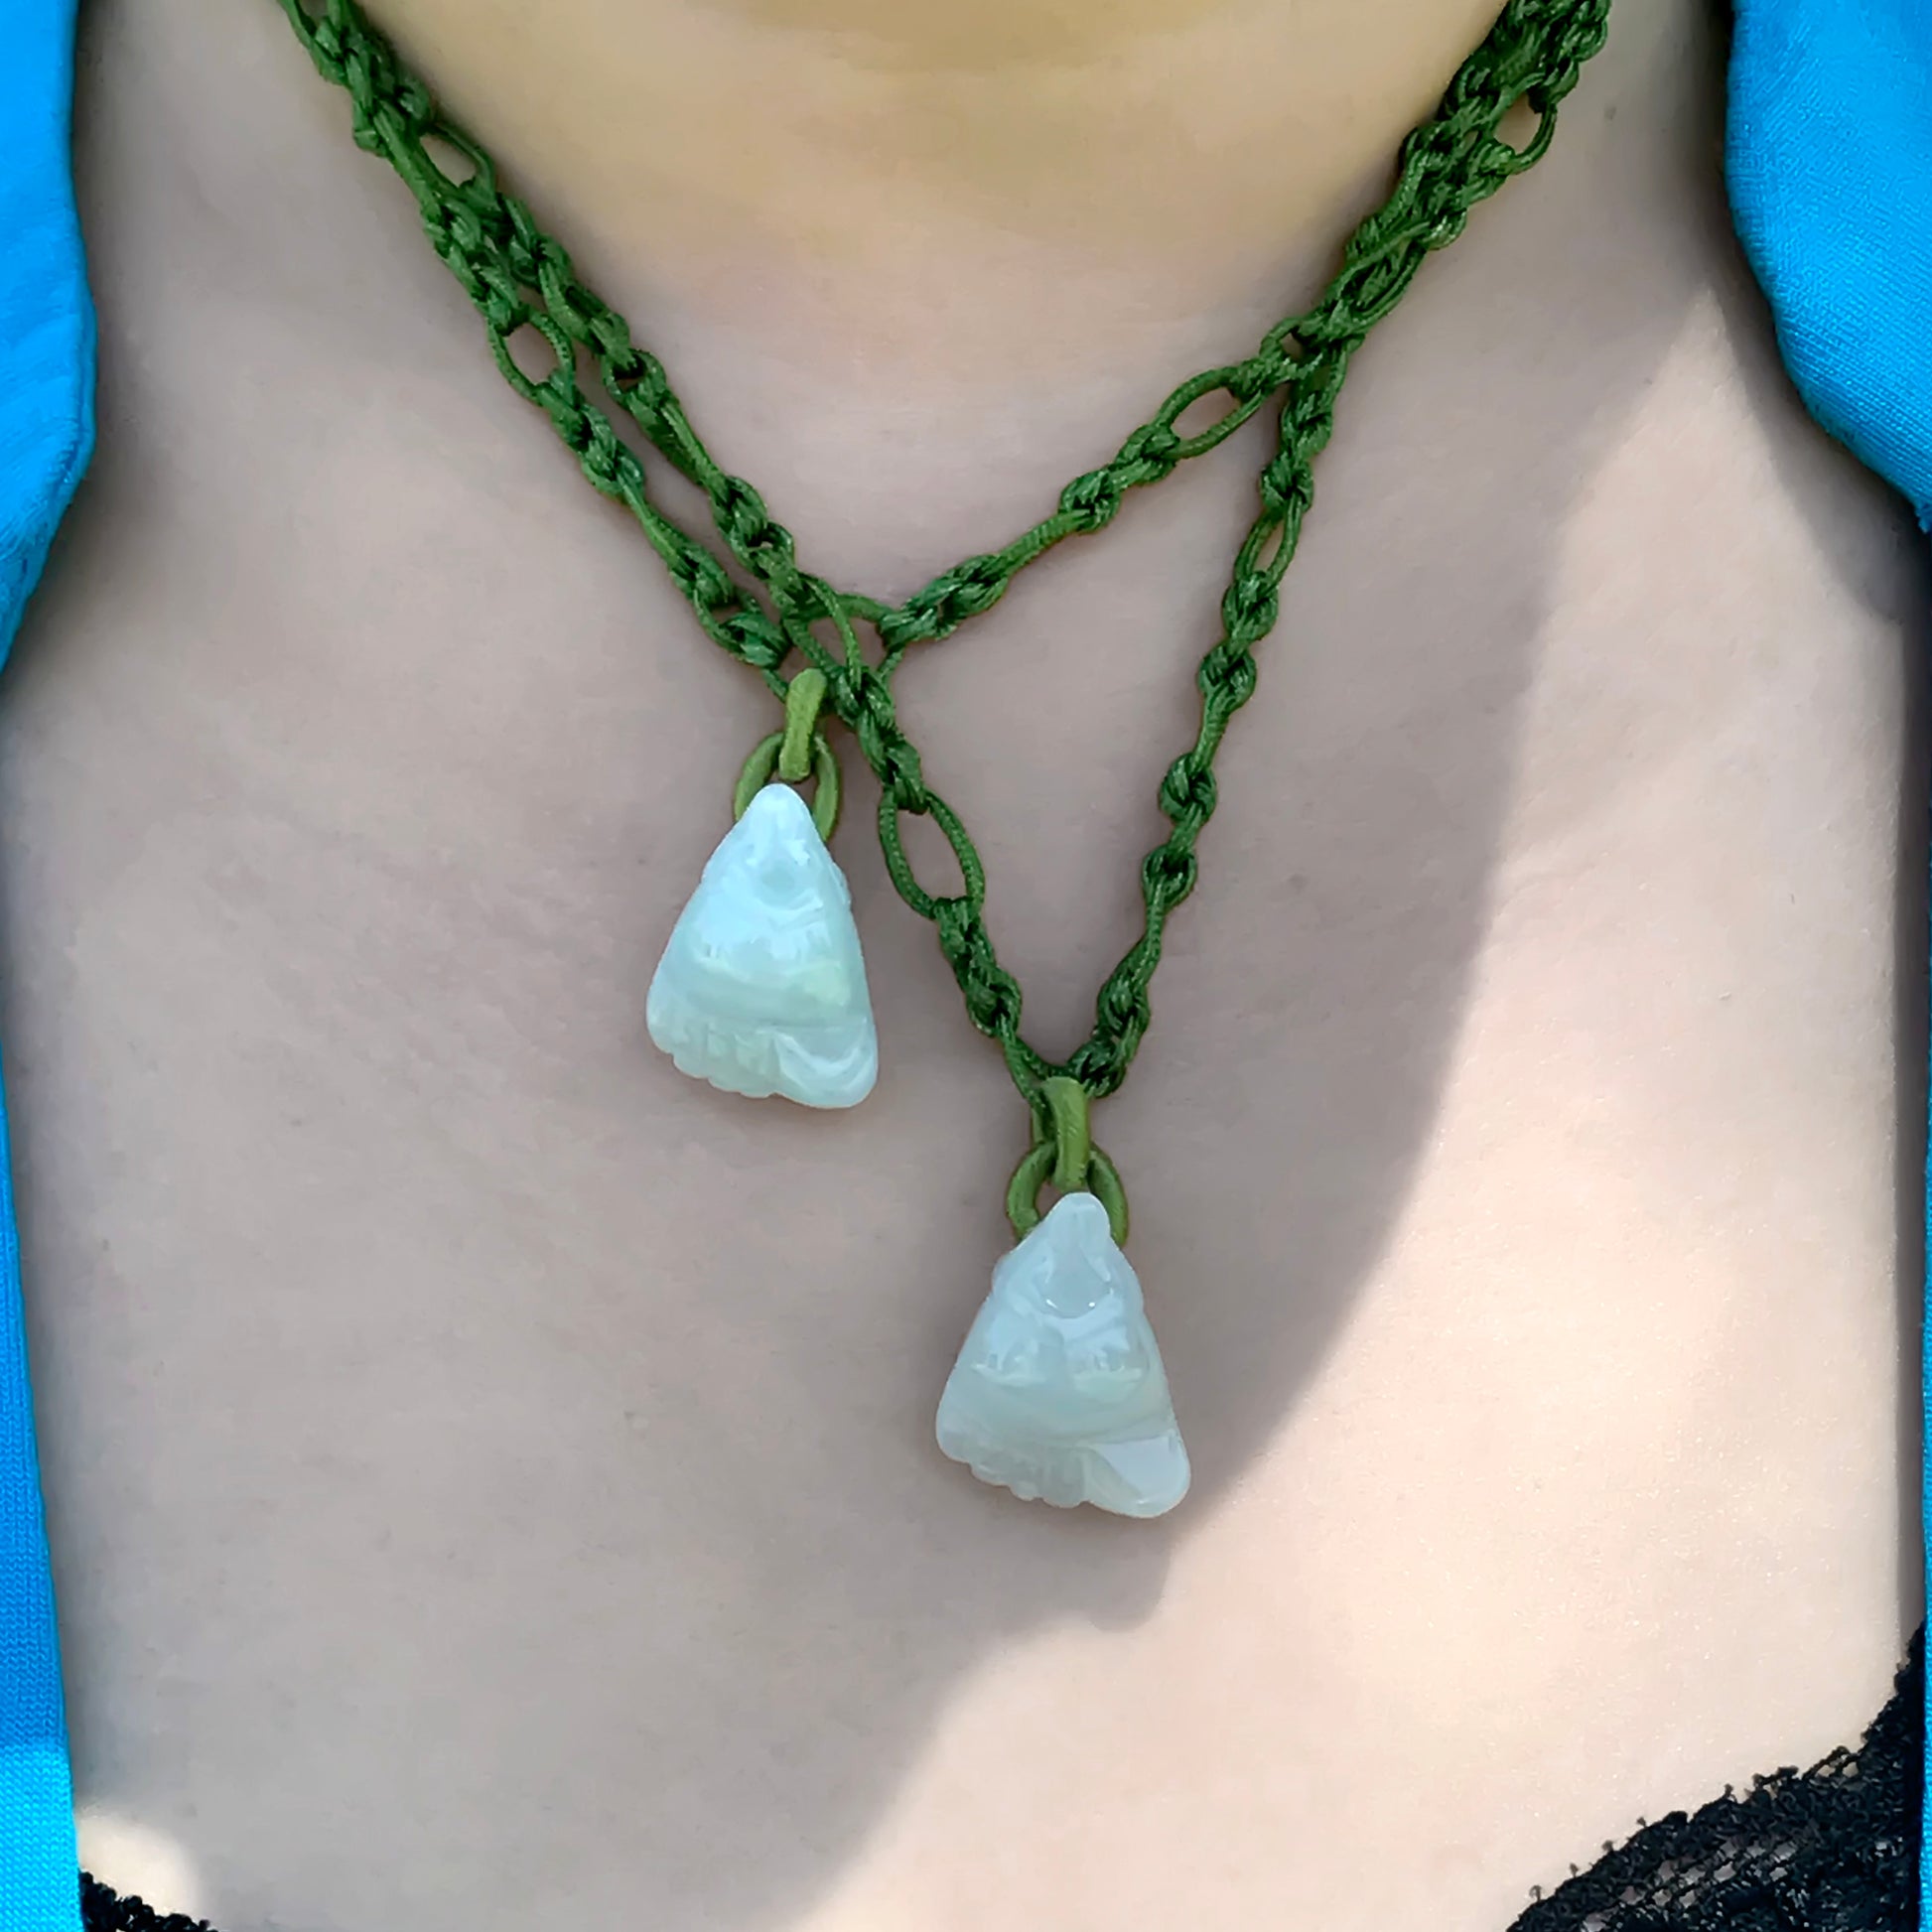 Make a Lasting Impression with a Dangling Foot Jade Necklace